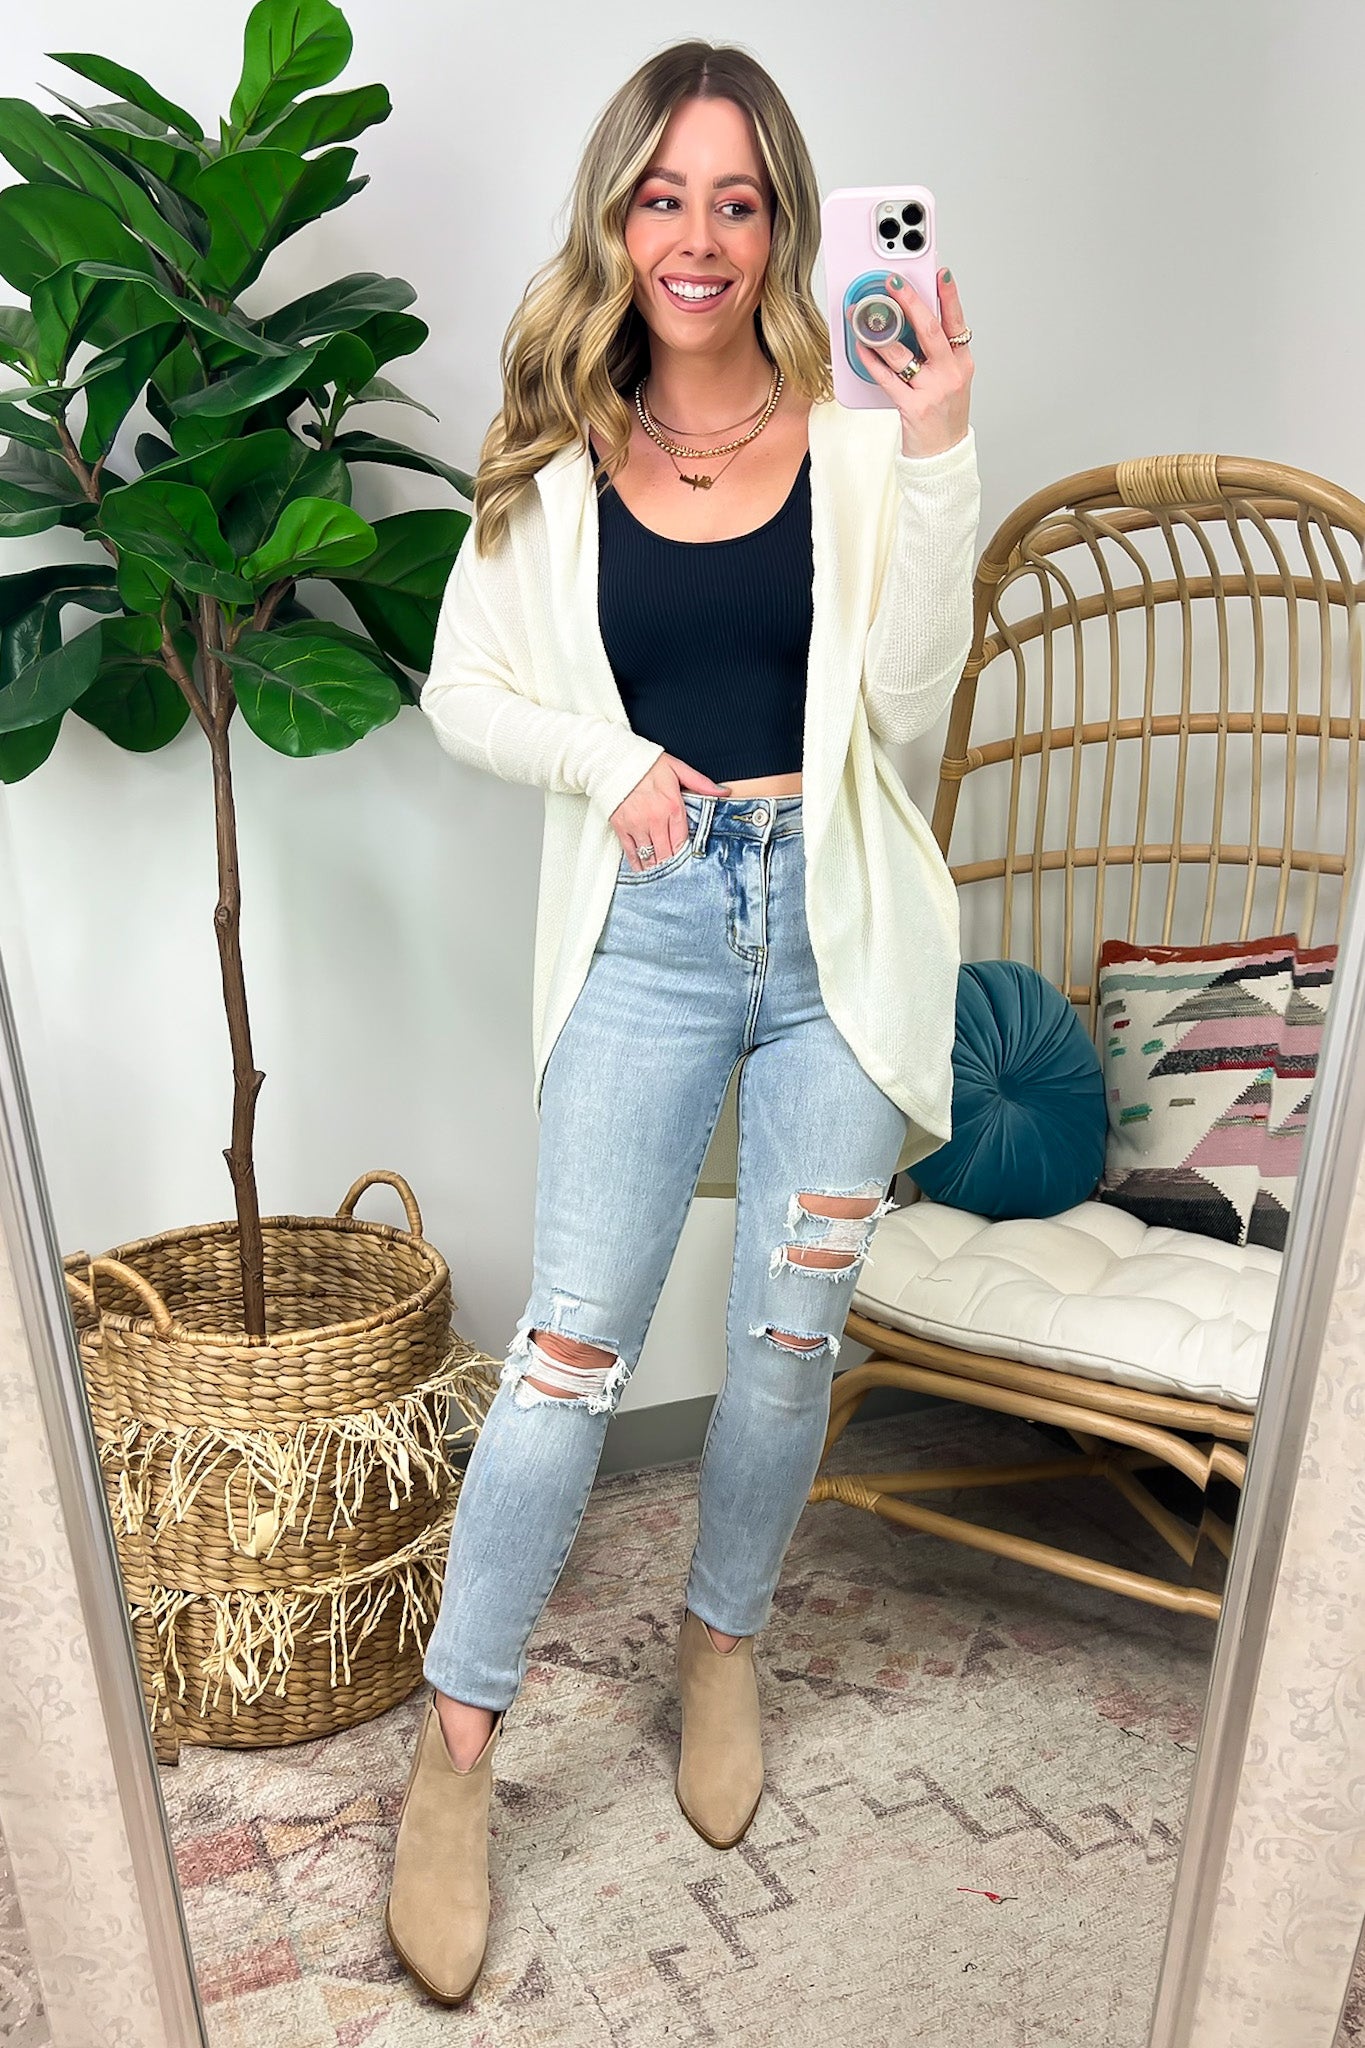  Subtle Sensation Hooded Knit Cardigan - FINAL SALE - Madison and Mallory